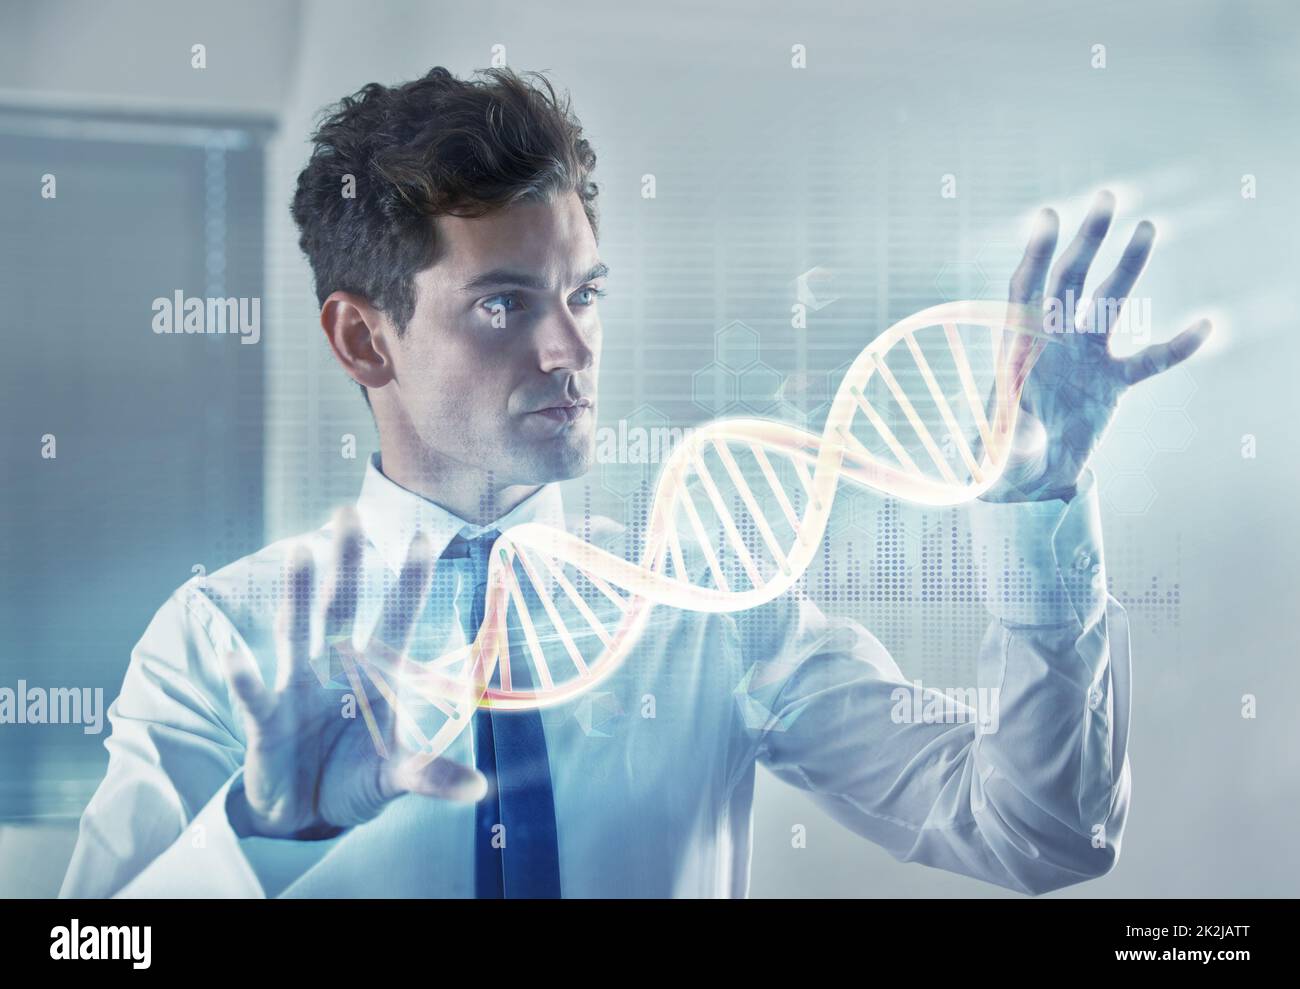 Shot of a young businessman using a cgi digital interface- ALL screen content on this image is created from scratch by Yuri Arcurs team of professionals for this particular photo shoot - this is an alternative version of iStock file 44832818 Stock Photo